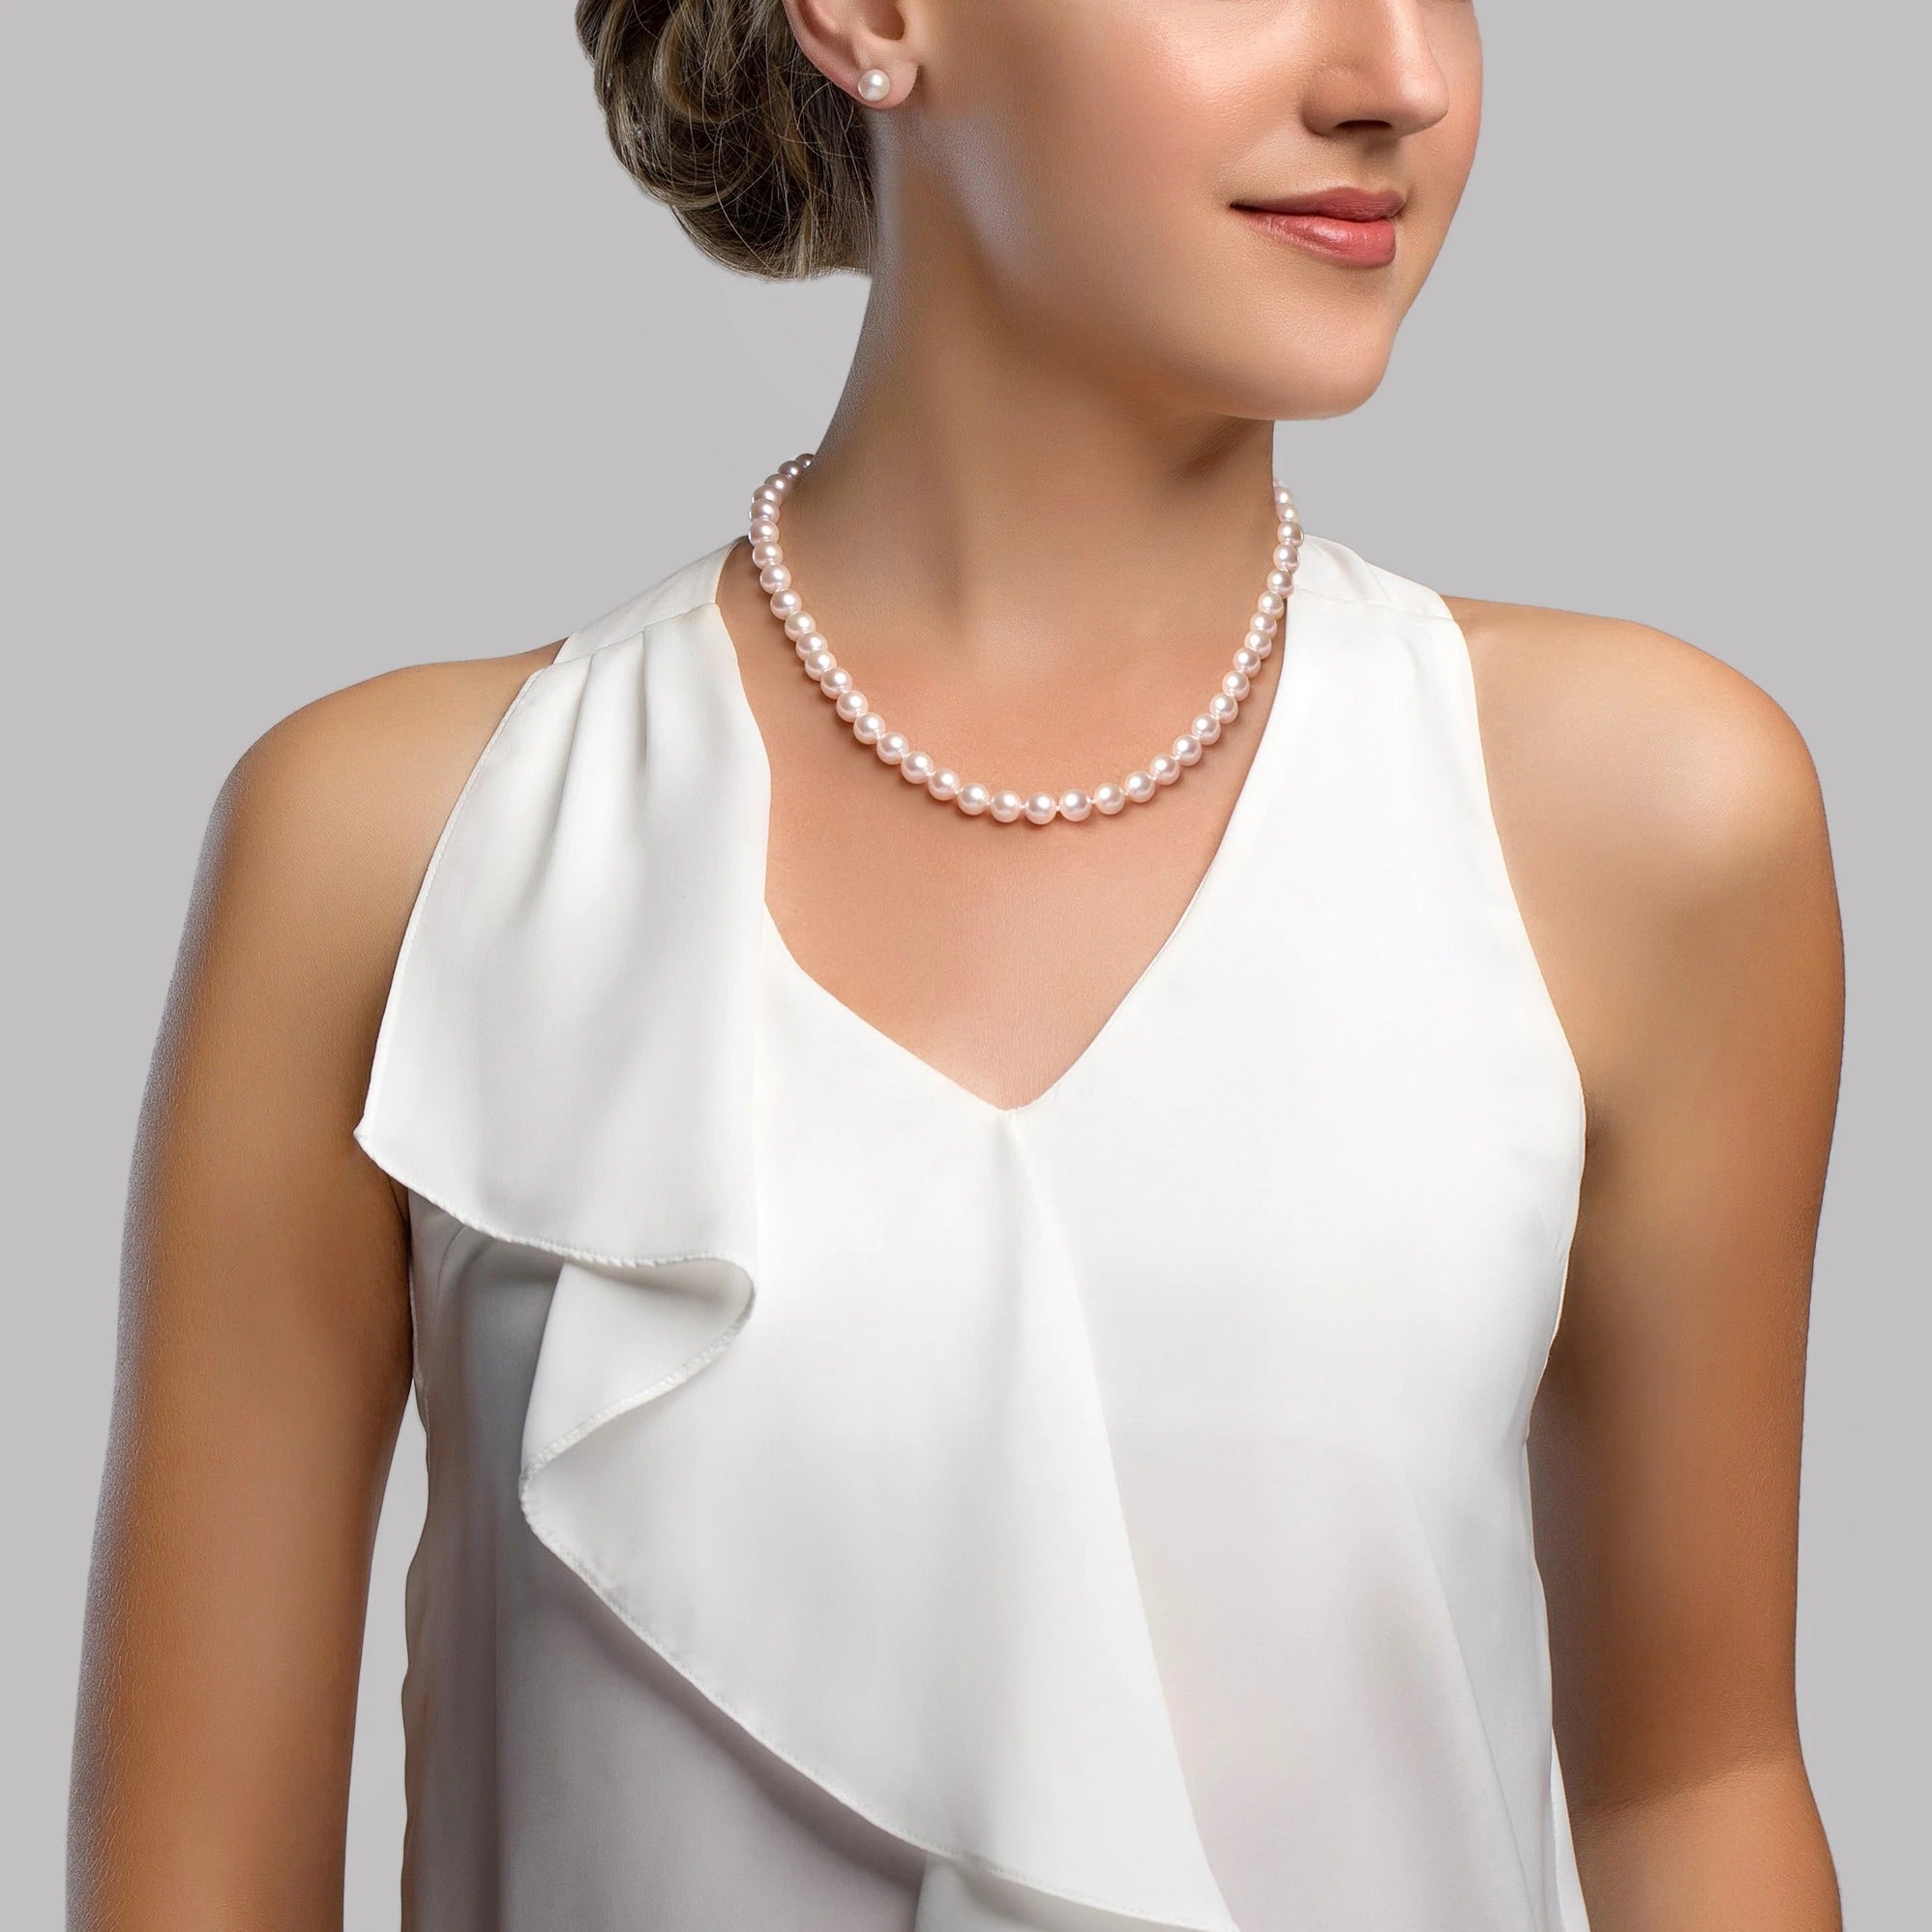 Styled shot of model wearing the Freshwater Pearl Necklace & Earrings in 7.0-7.5mm size